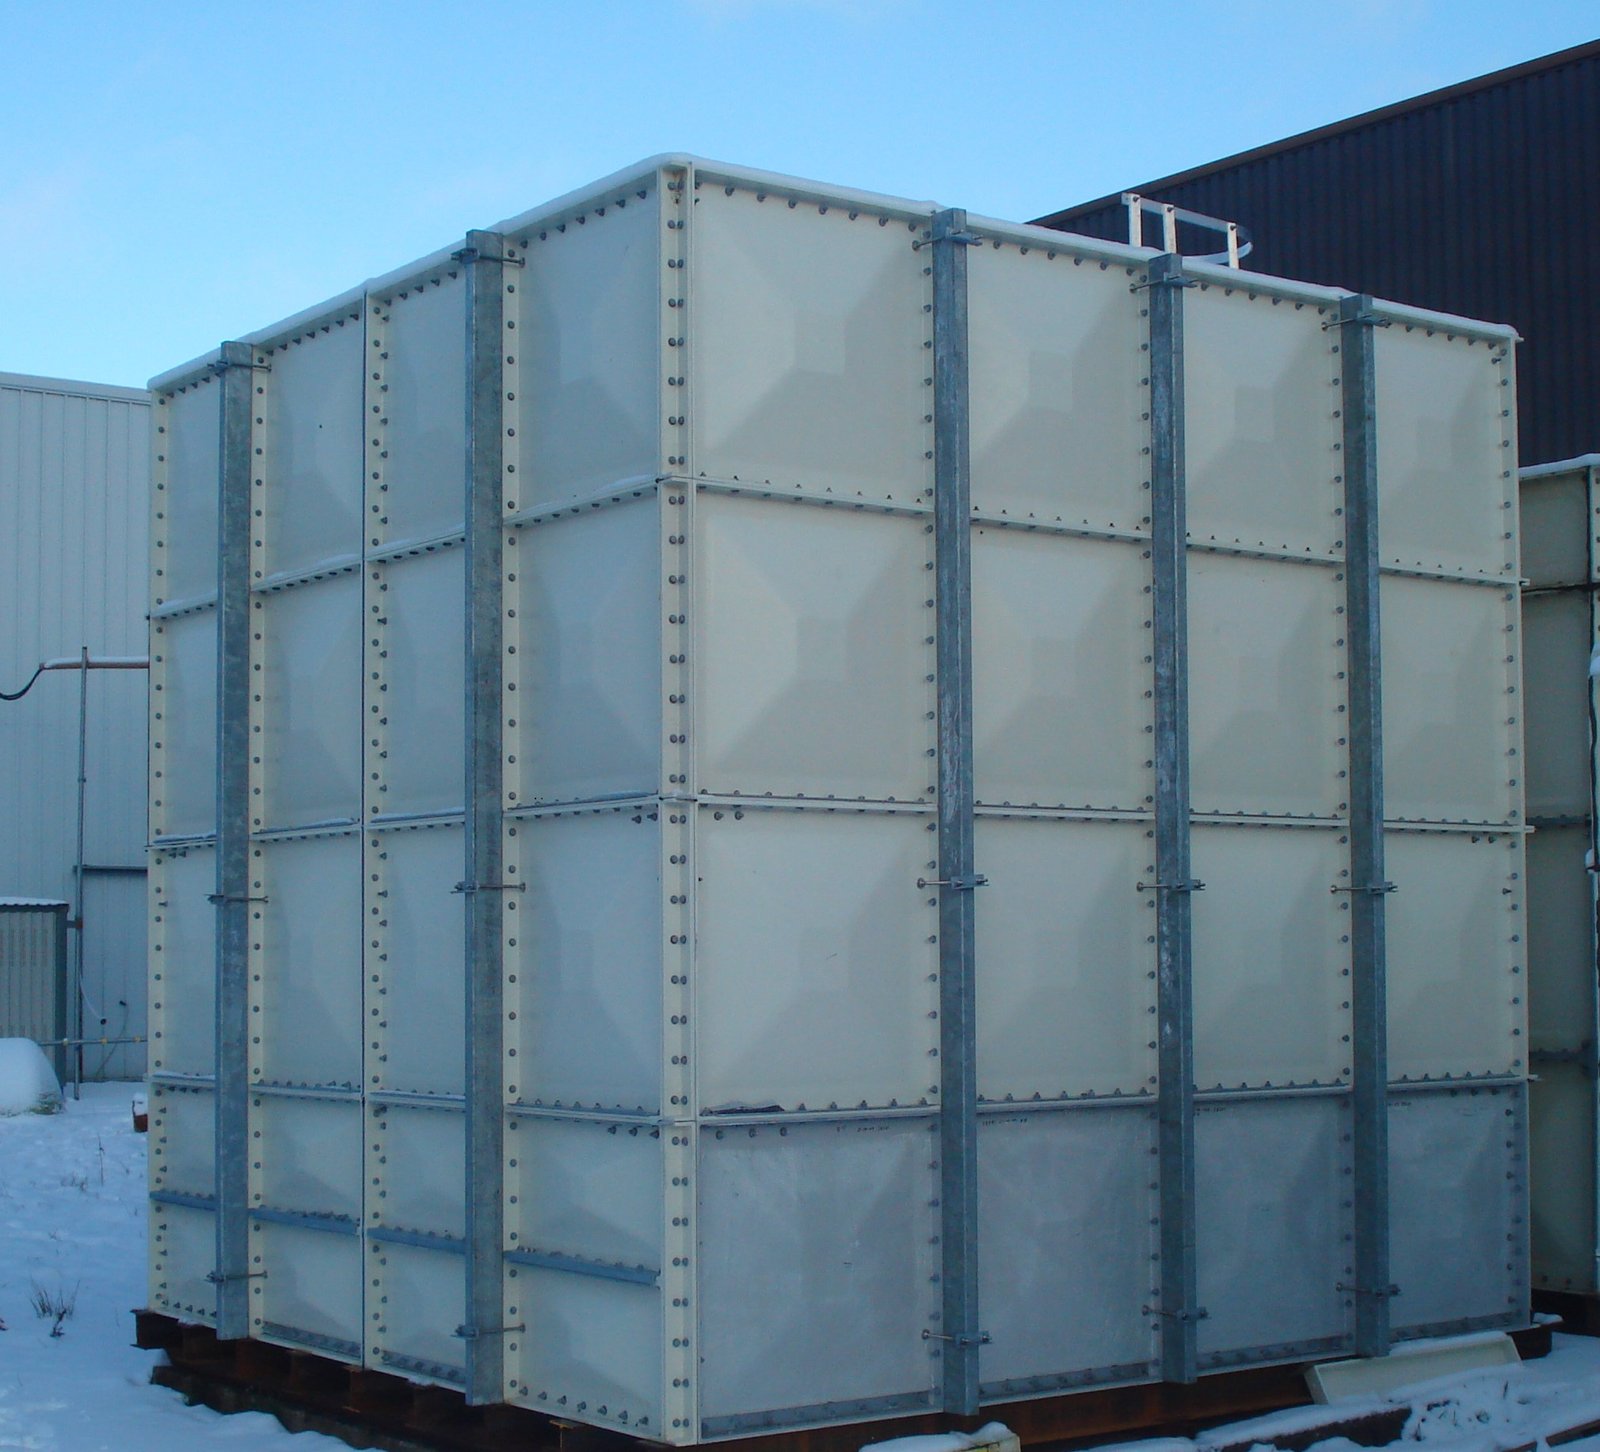 Comparing the Top Water Storage Cubes